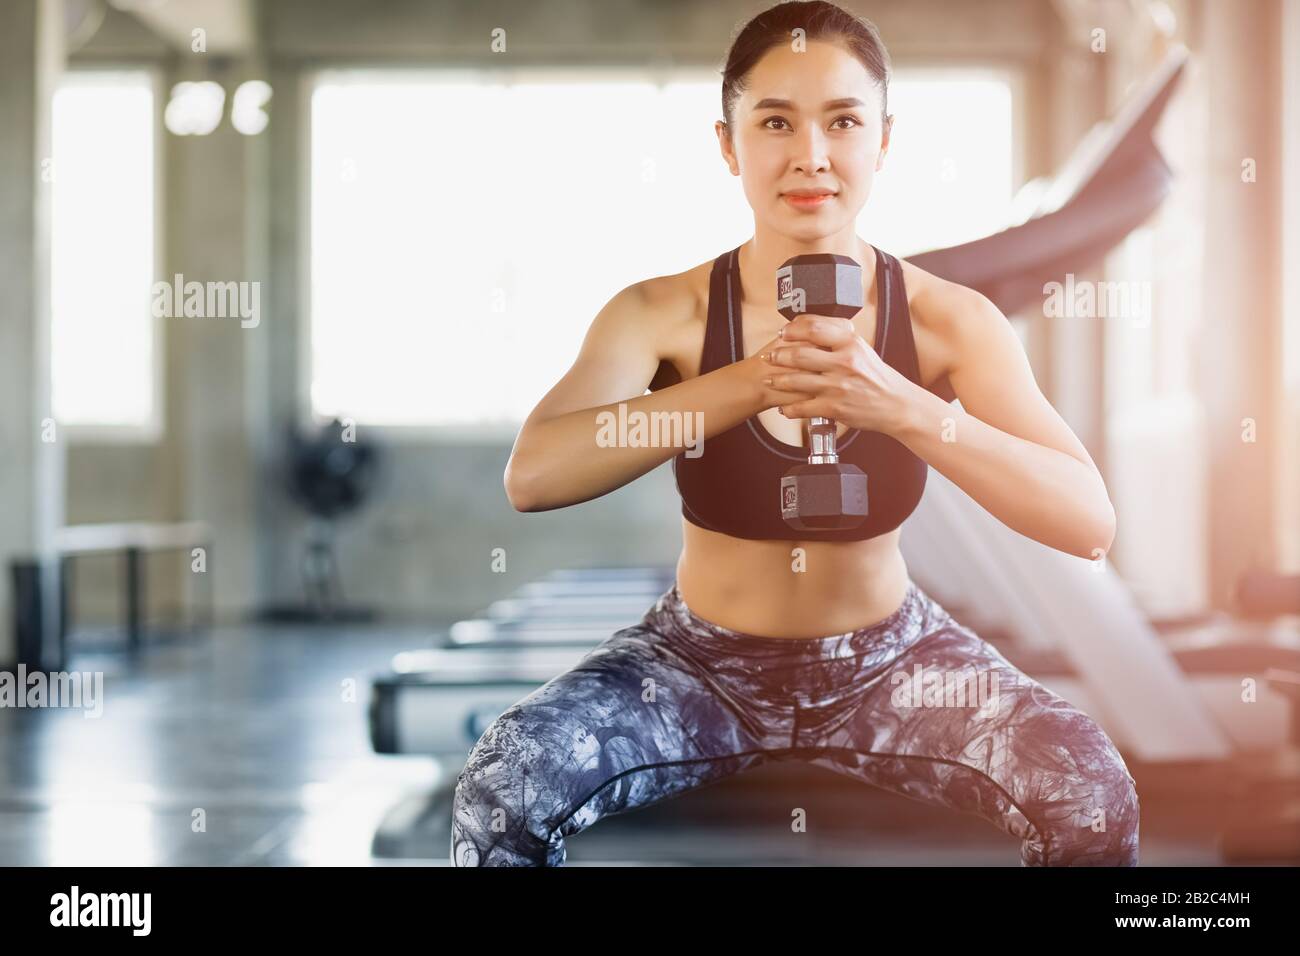 Photographie Fitness girl posing in the gym - Acheter-le sur